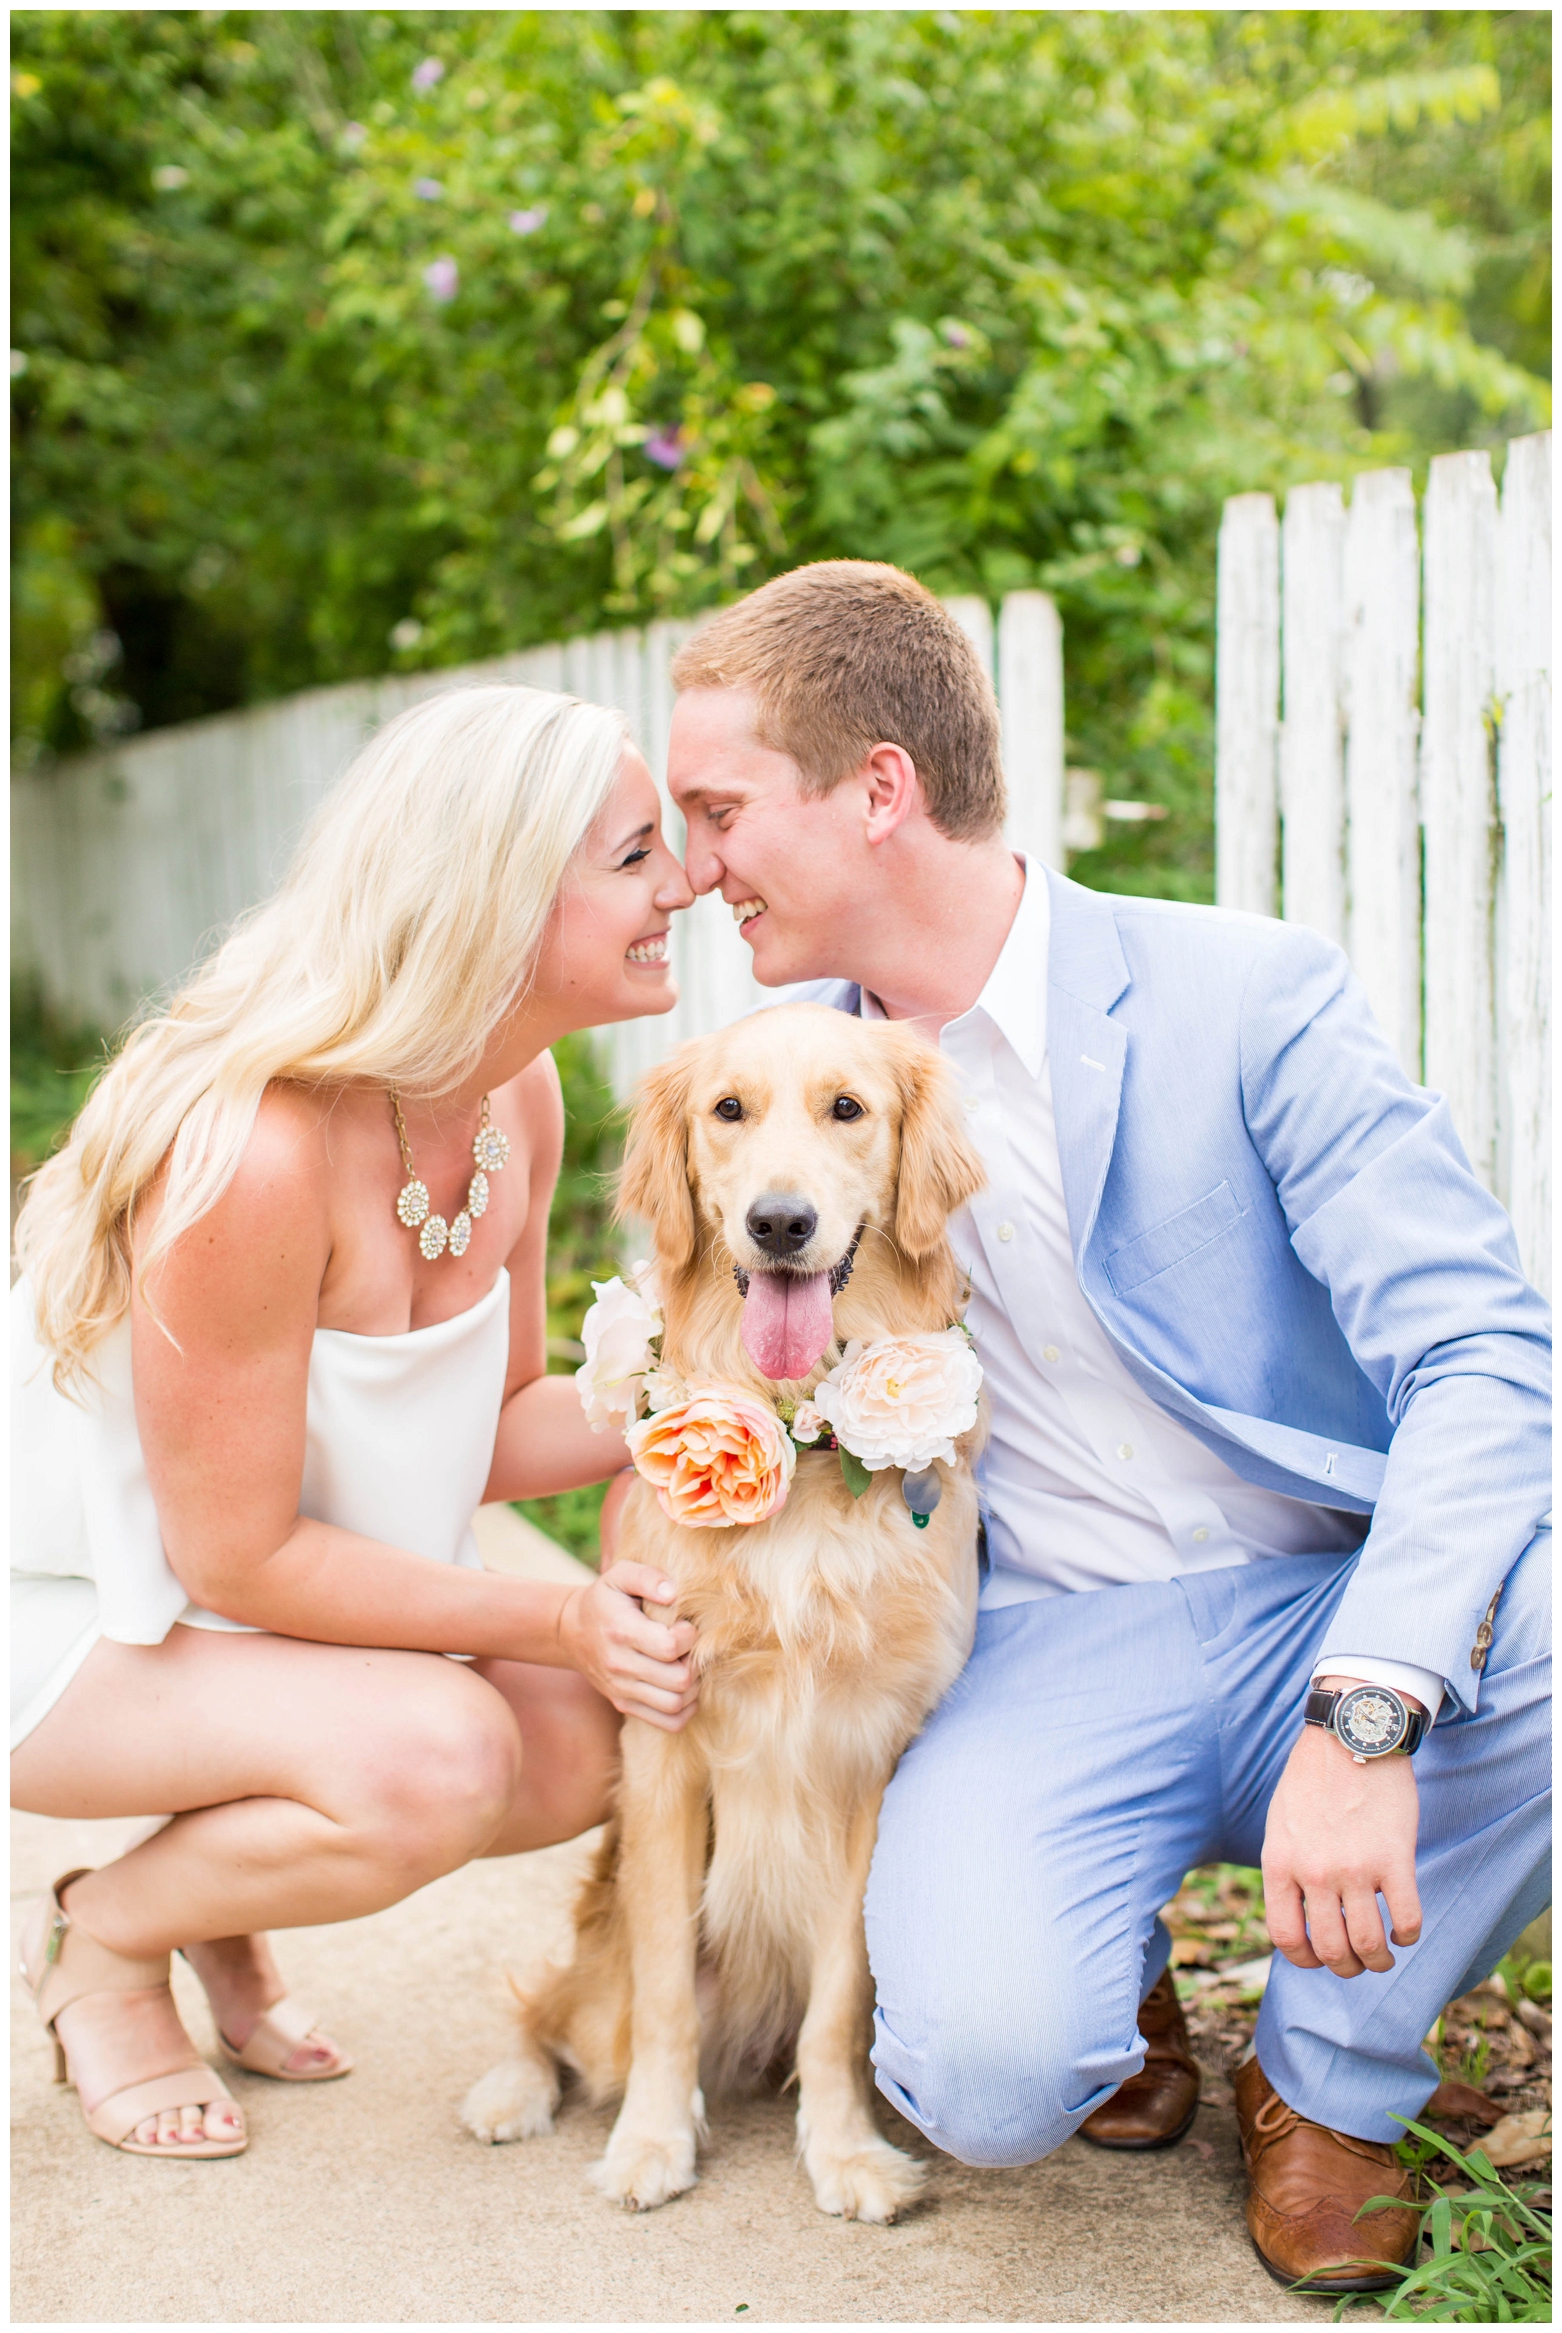 View More: http://hopetaylorphotographyphotos.pass.us/katie-and-ryan-engagement